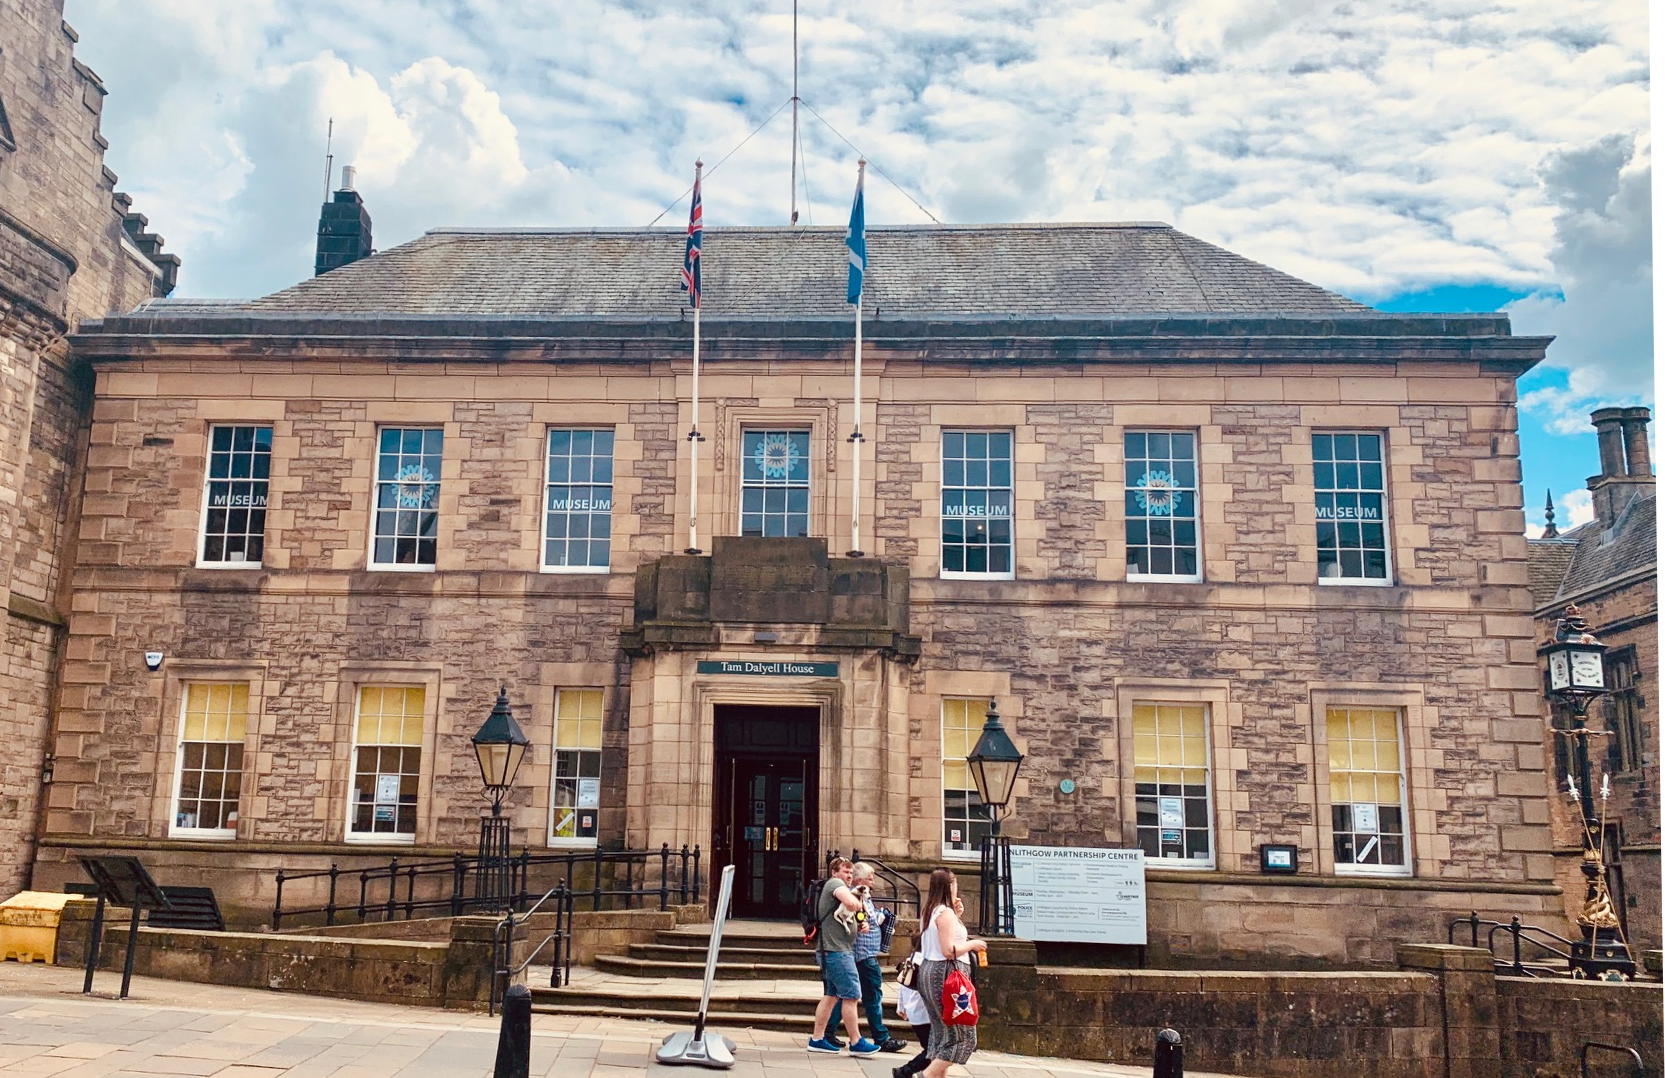 County Buildings, Linlithgow